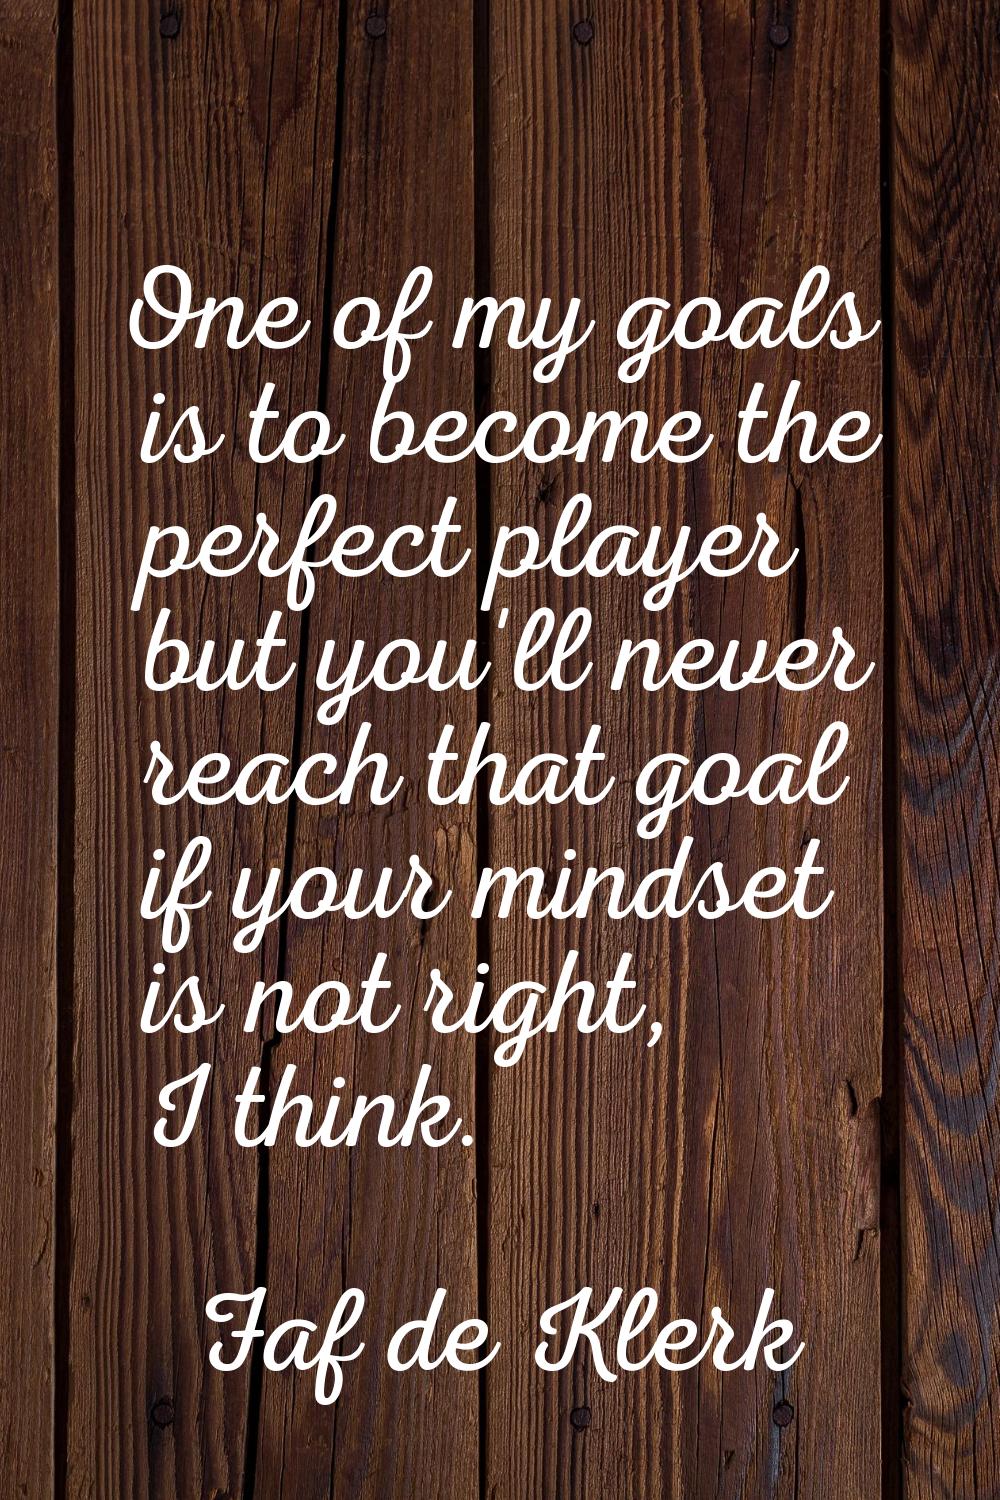 One of my goals is to become the perfect player but you'll never reach that goal if your mindset is